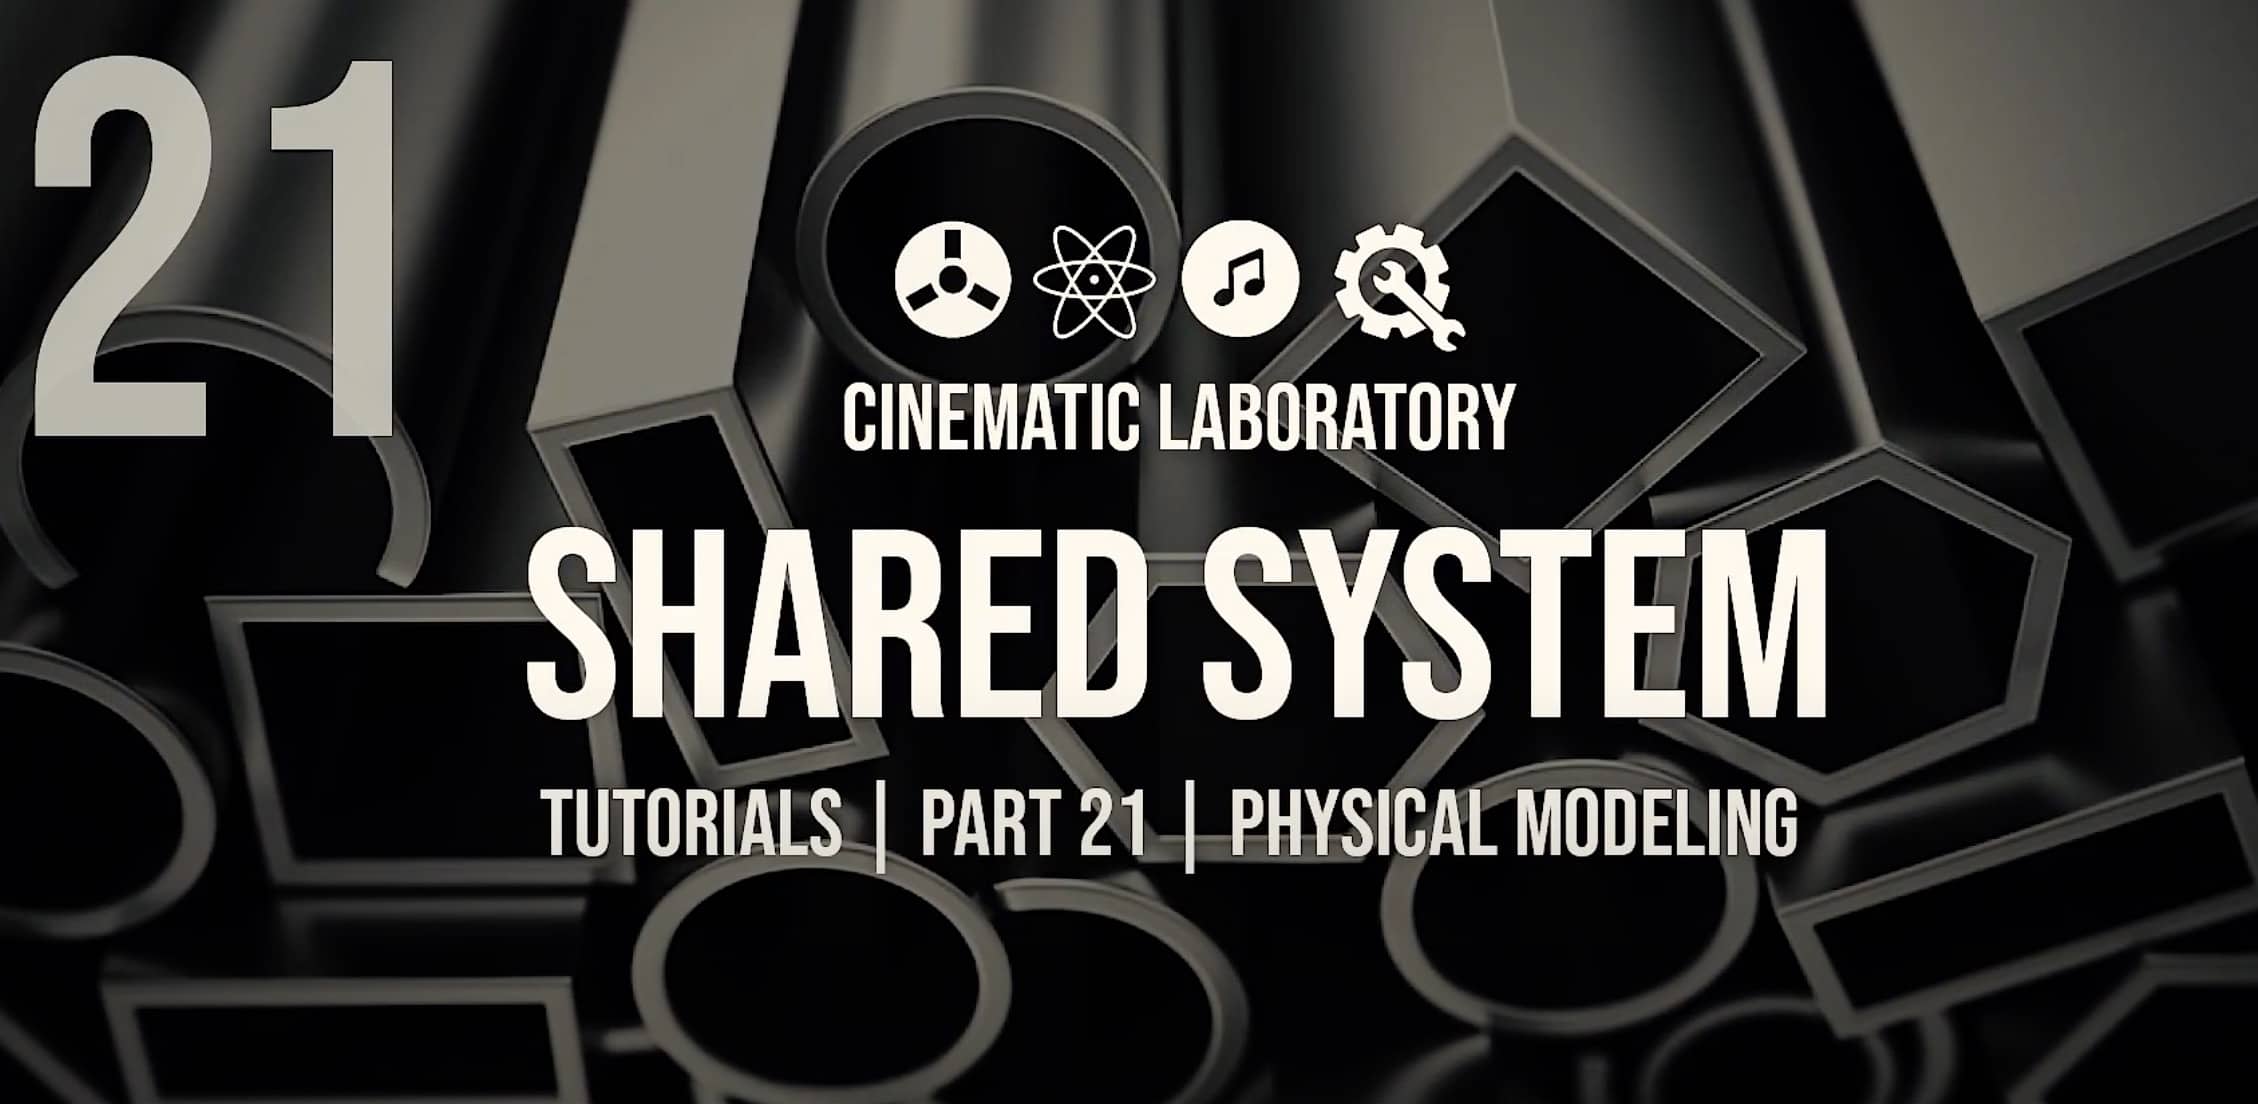 Shared System Tutorials | Part 21 – Physical Modeling